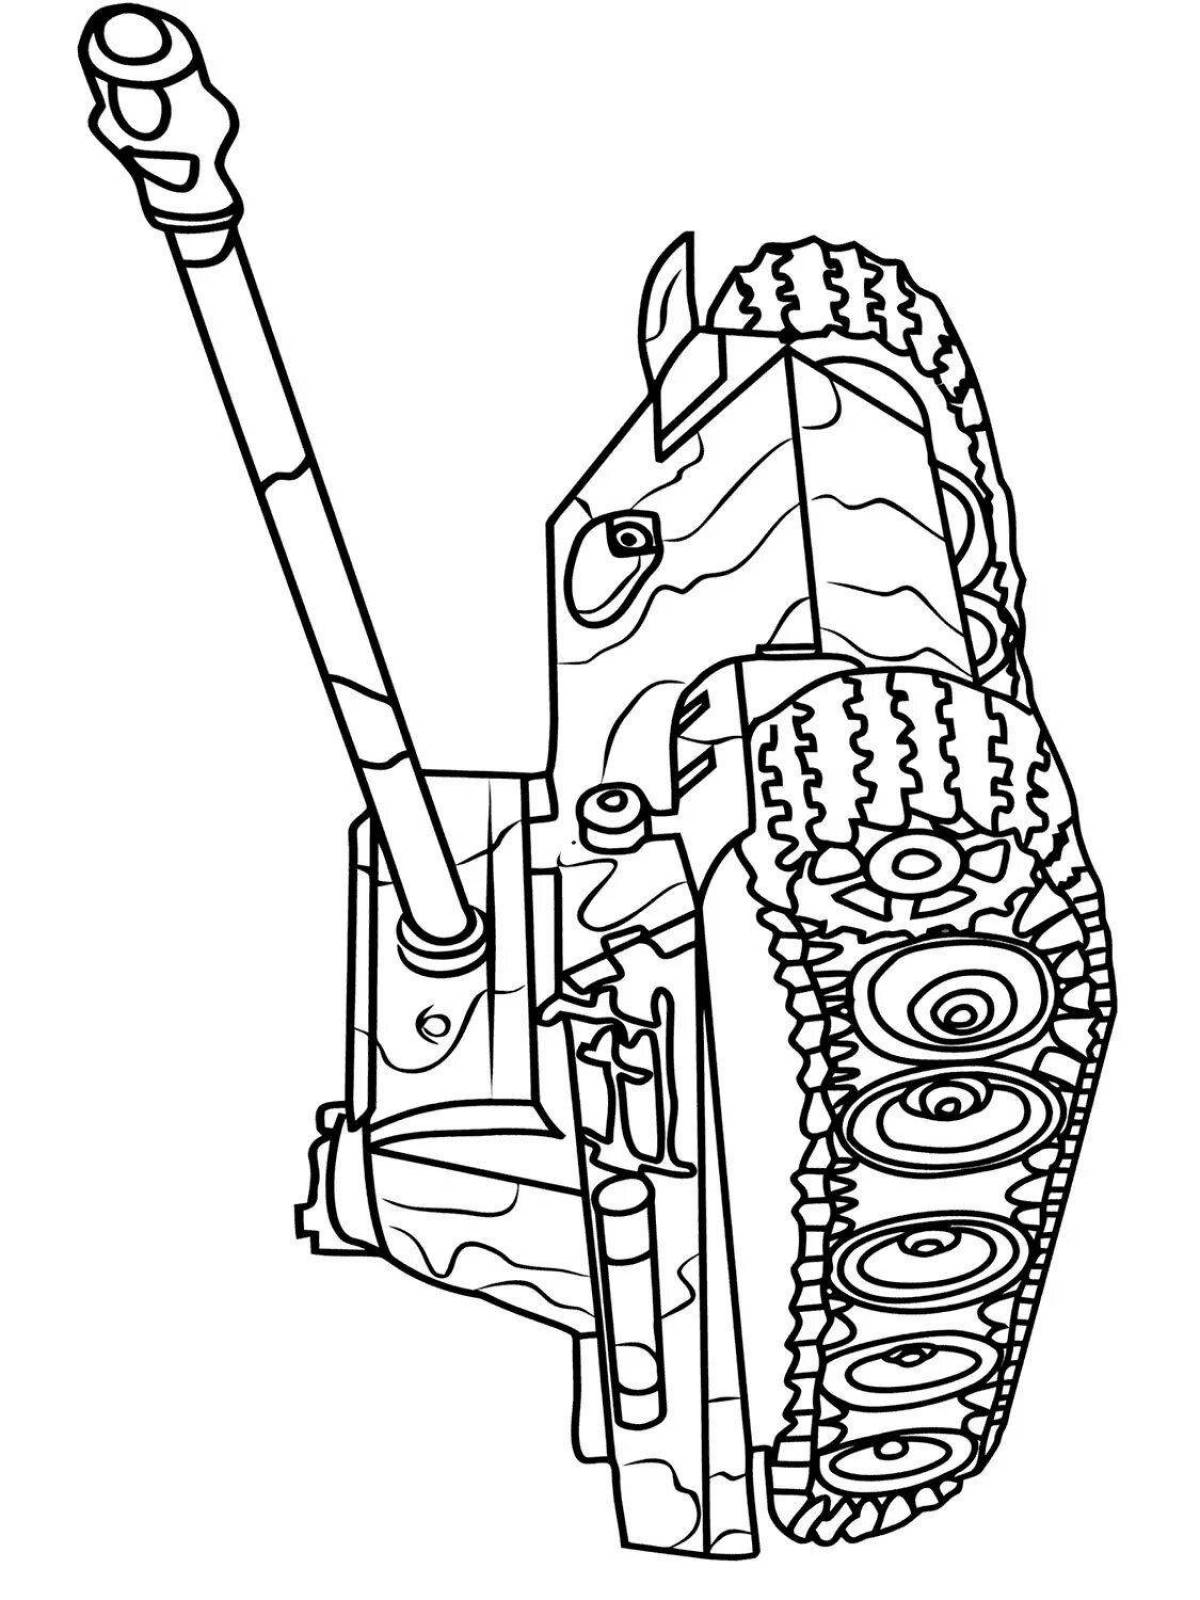 Playful t-72 coloring page